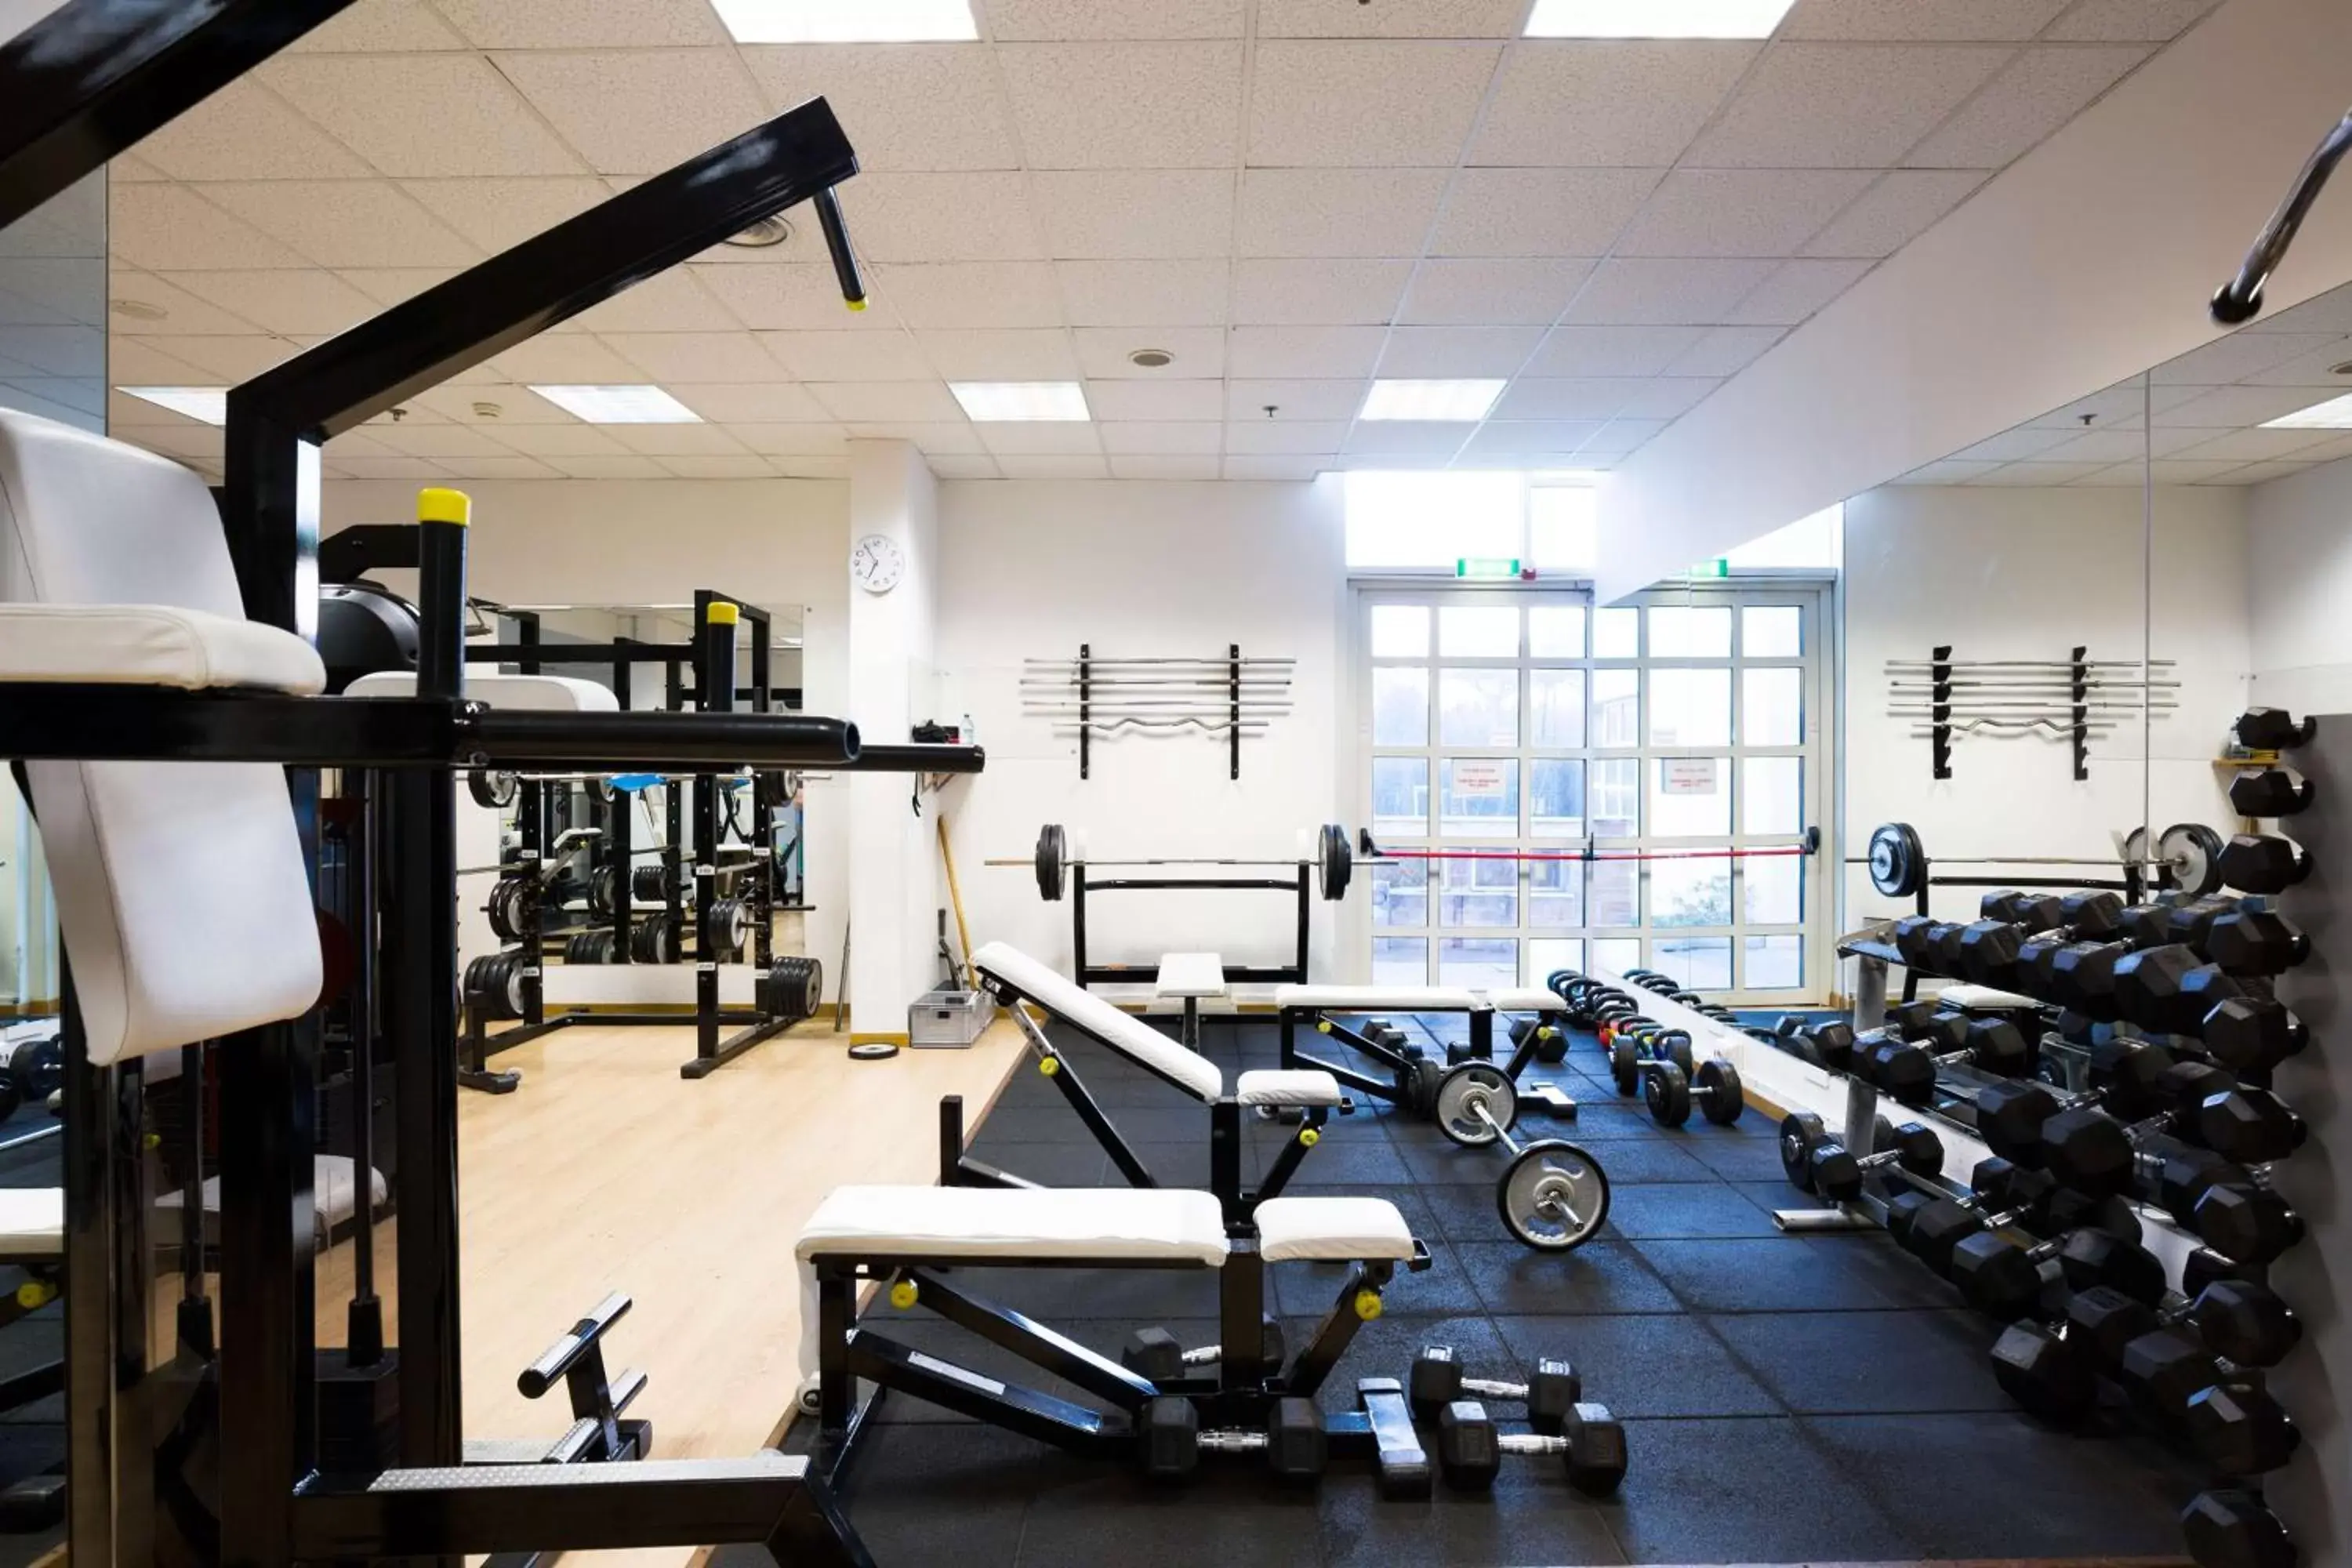 Fitness centre/facilities, Fitness Center/Facilities in Hilton Rome Airport